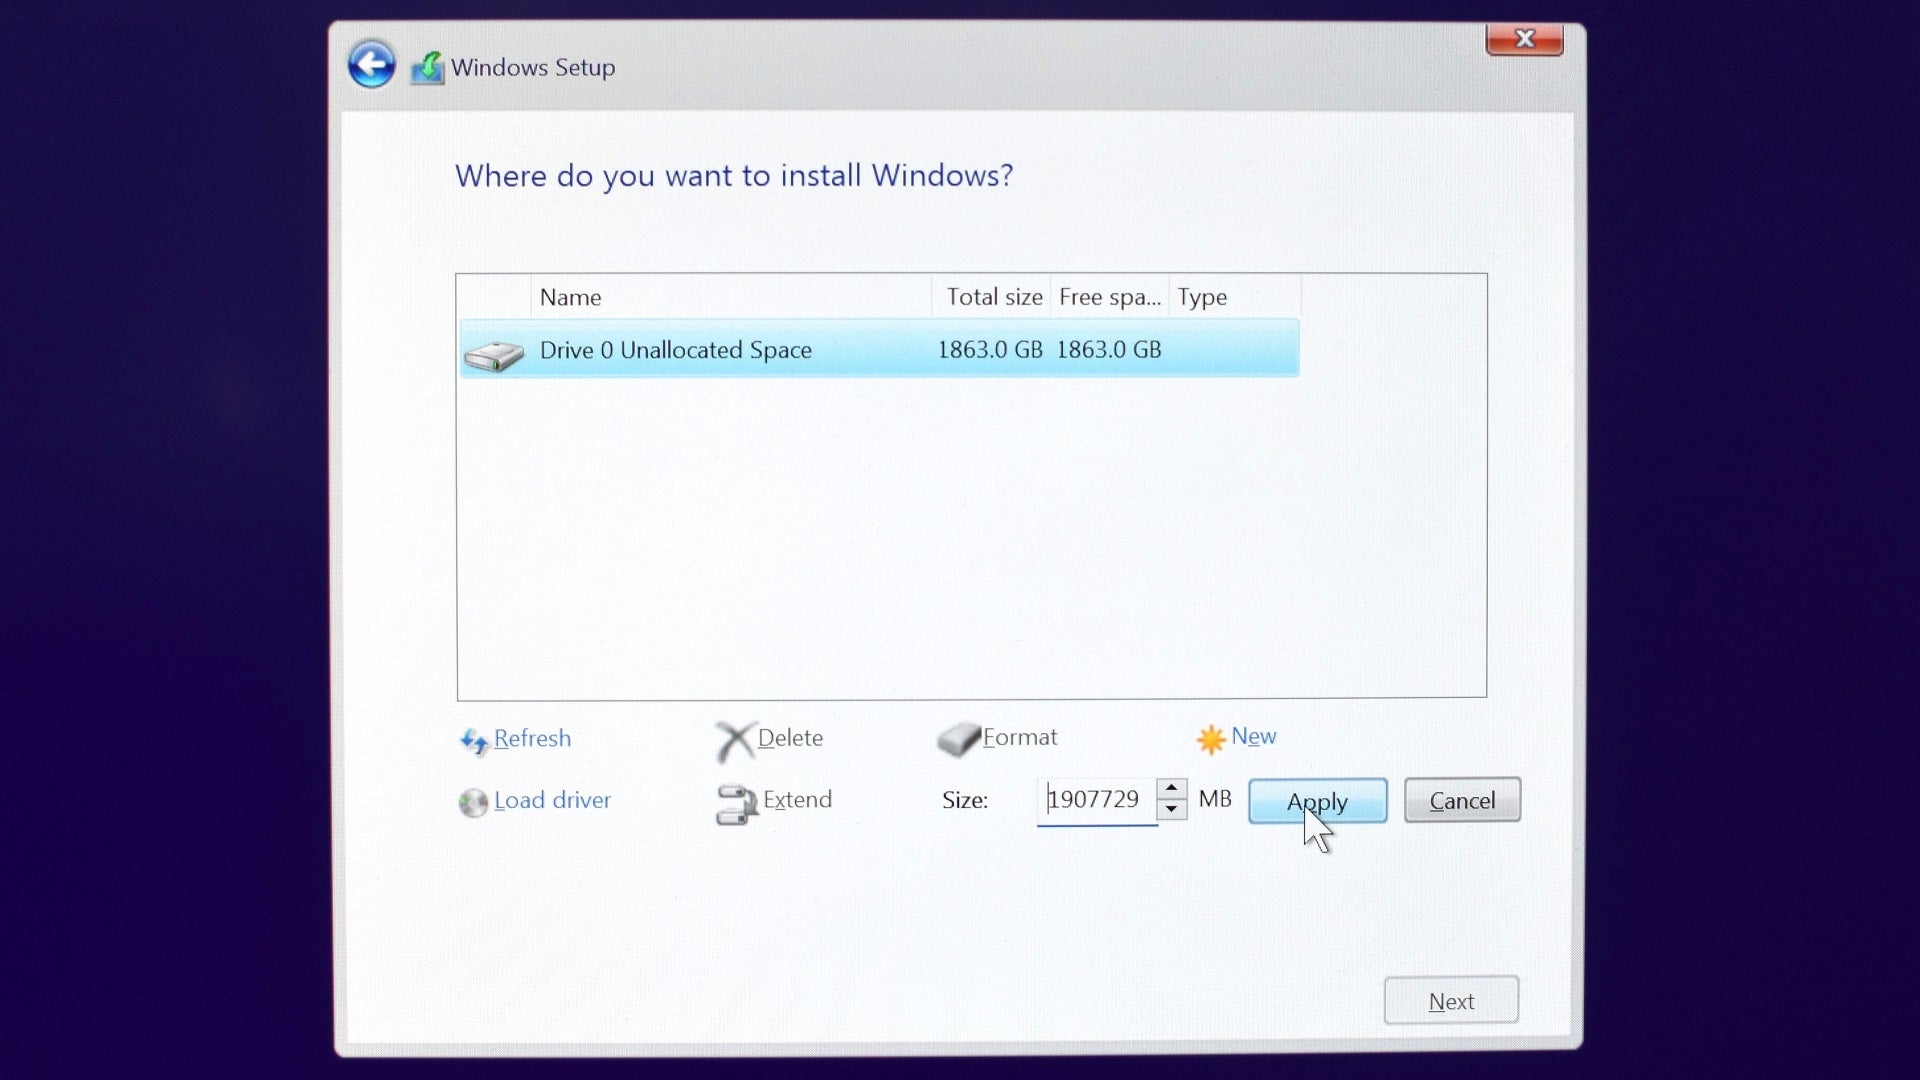 Step 4 of how to install Windows: select 'Customize' then select the storage drive you want to install Windows on. Click 'Format', then 'New', then 'Apply'. Finally, select the largest, newly-created partition and click 'Next'.